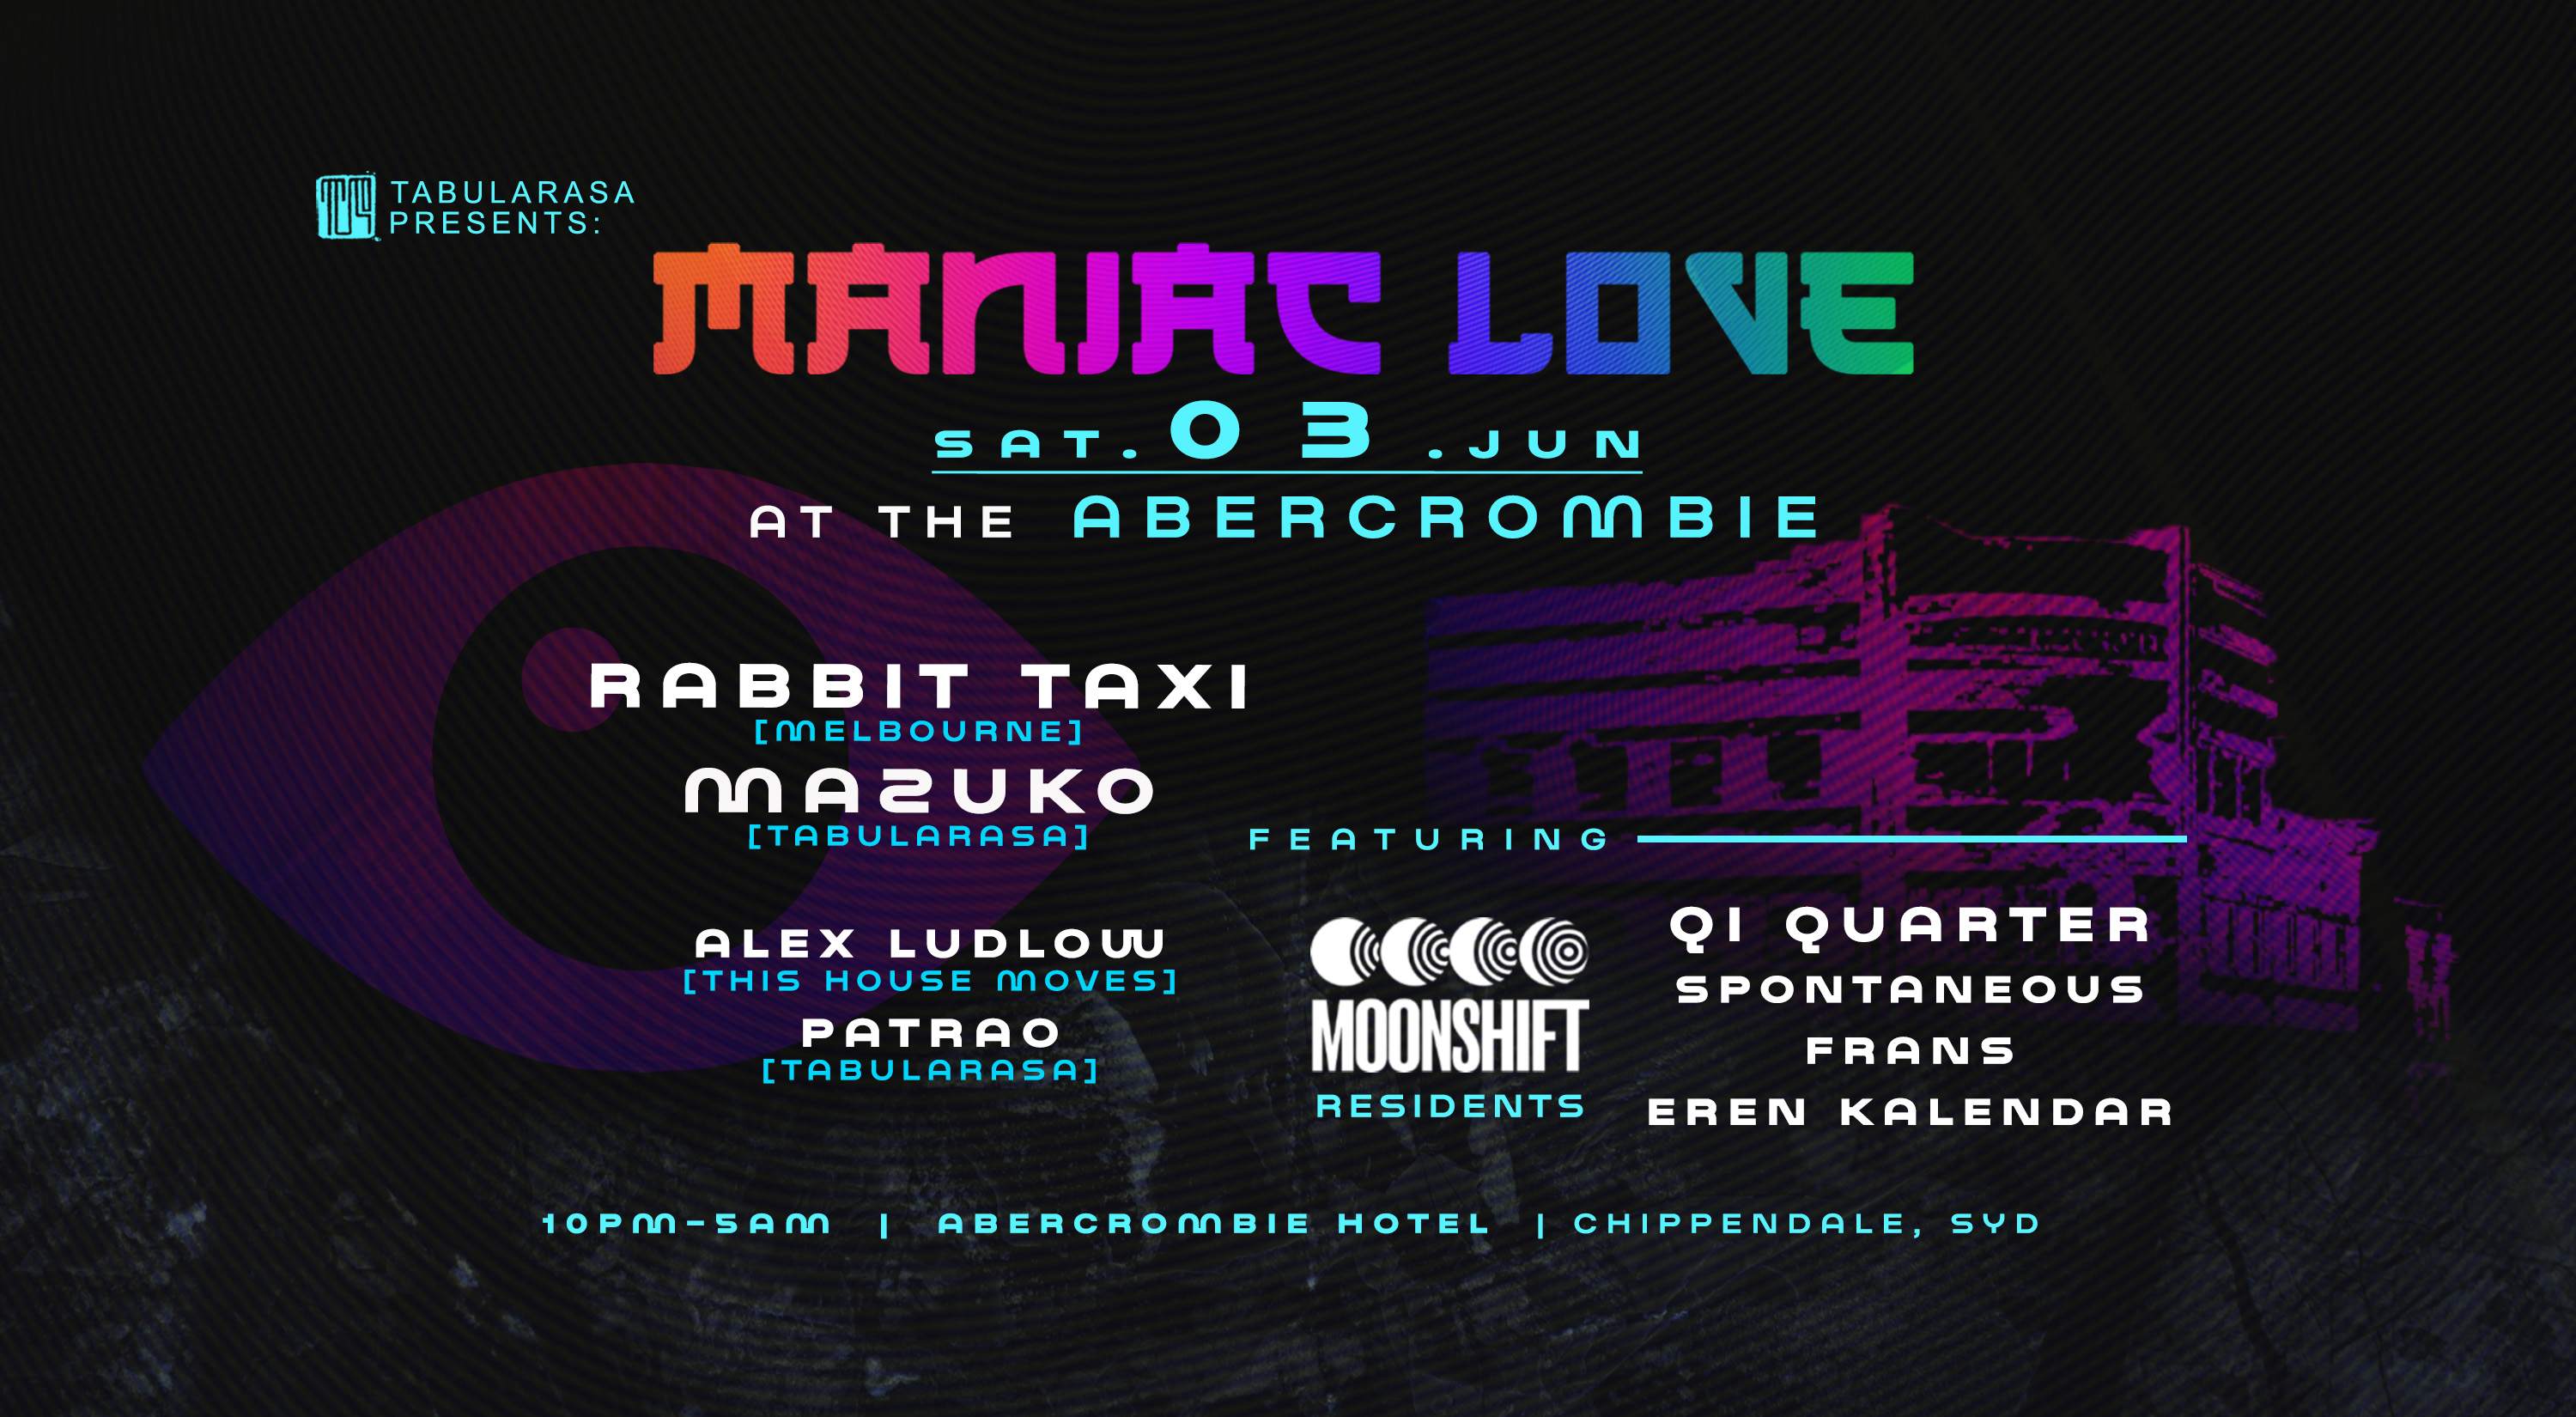 TR pres. MANIAC LOVE at the Abercrombie with Rabbit Taxi feat. Moonshift - 3 JUN 23 - Página frontal